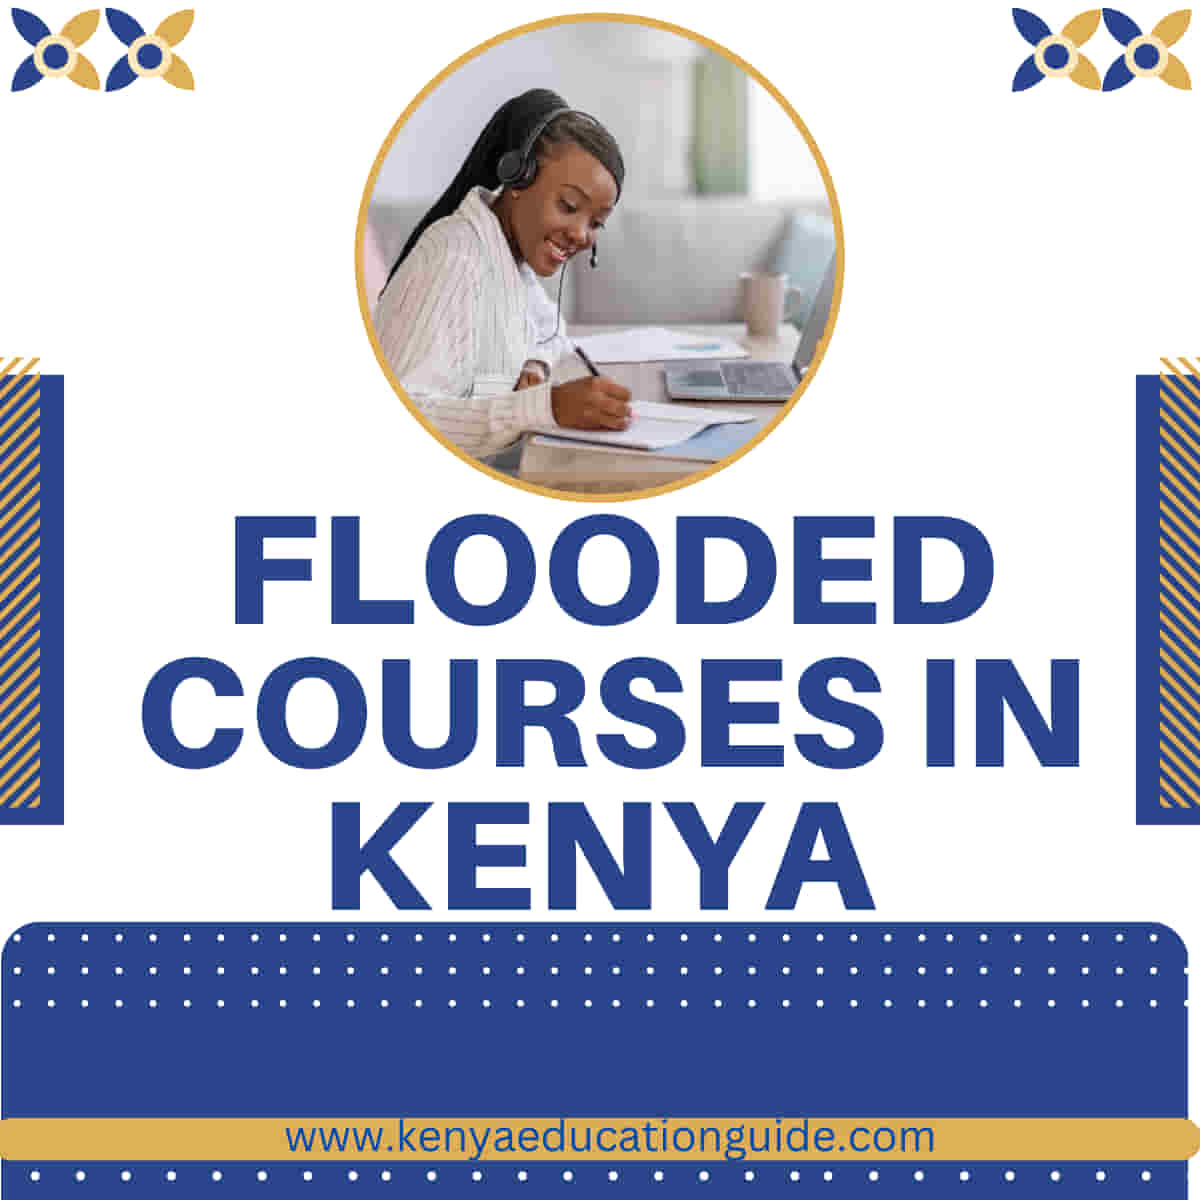 Flooded courses in Kenya